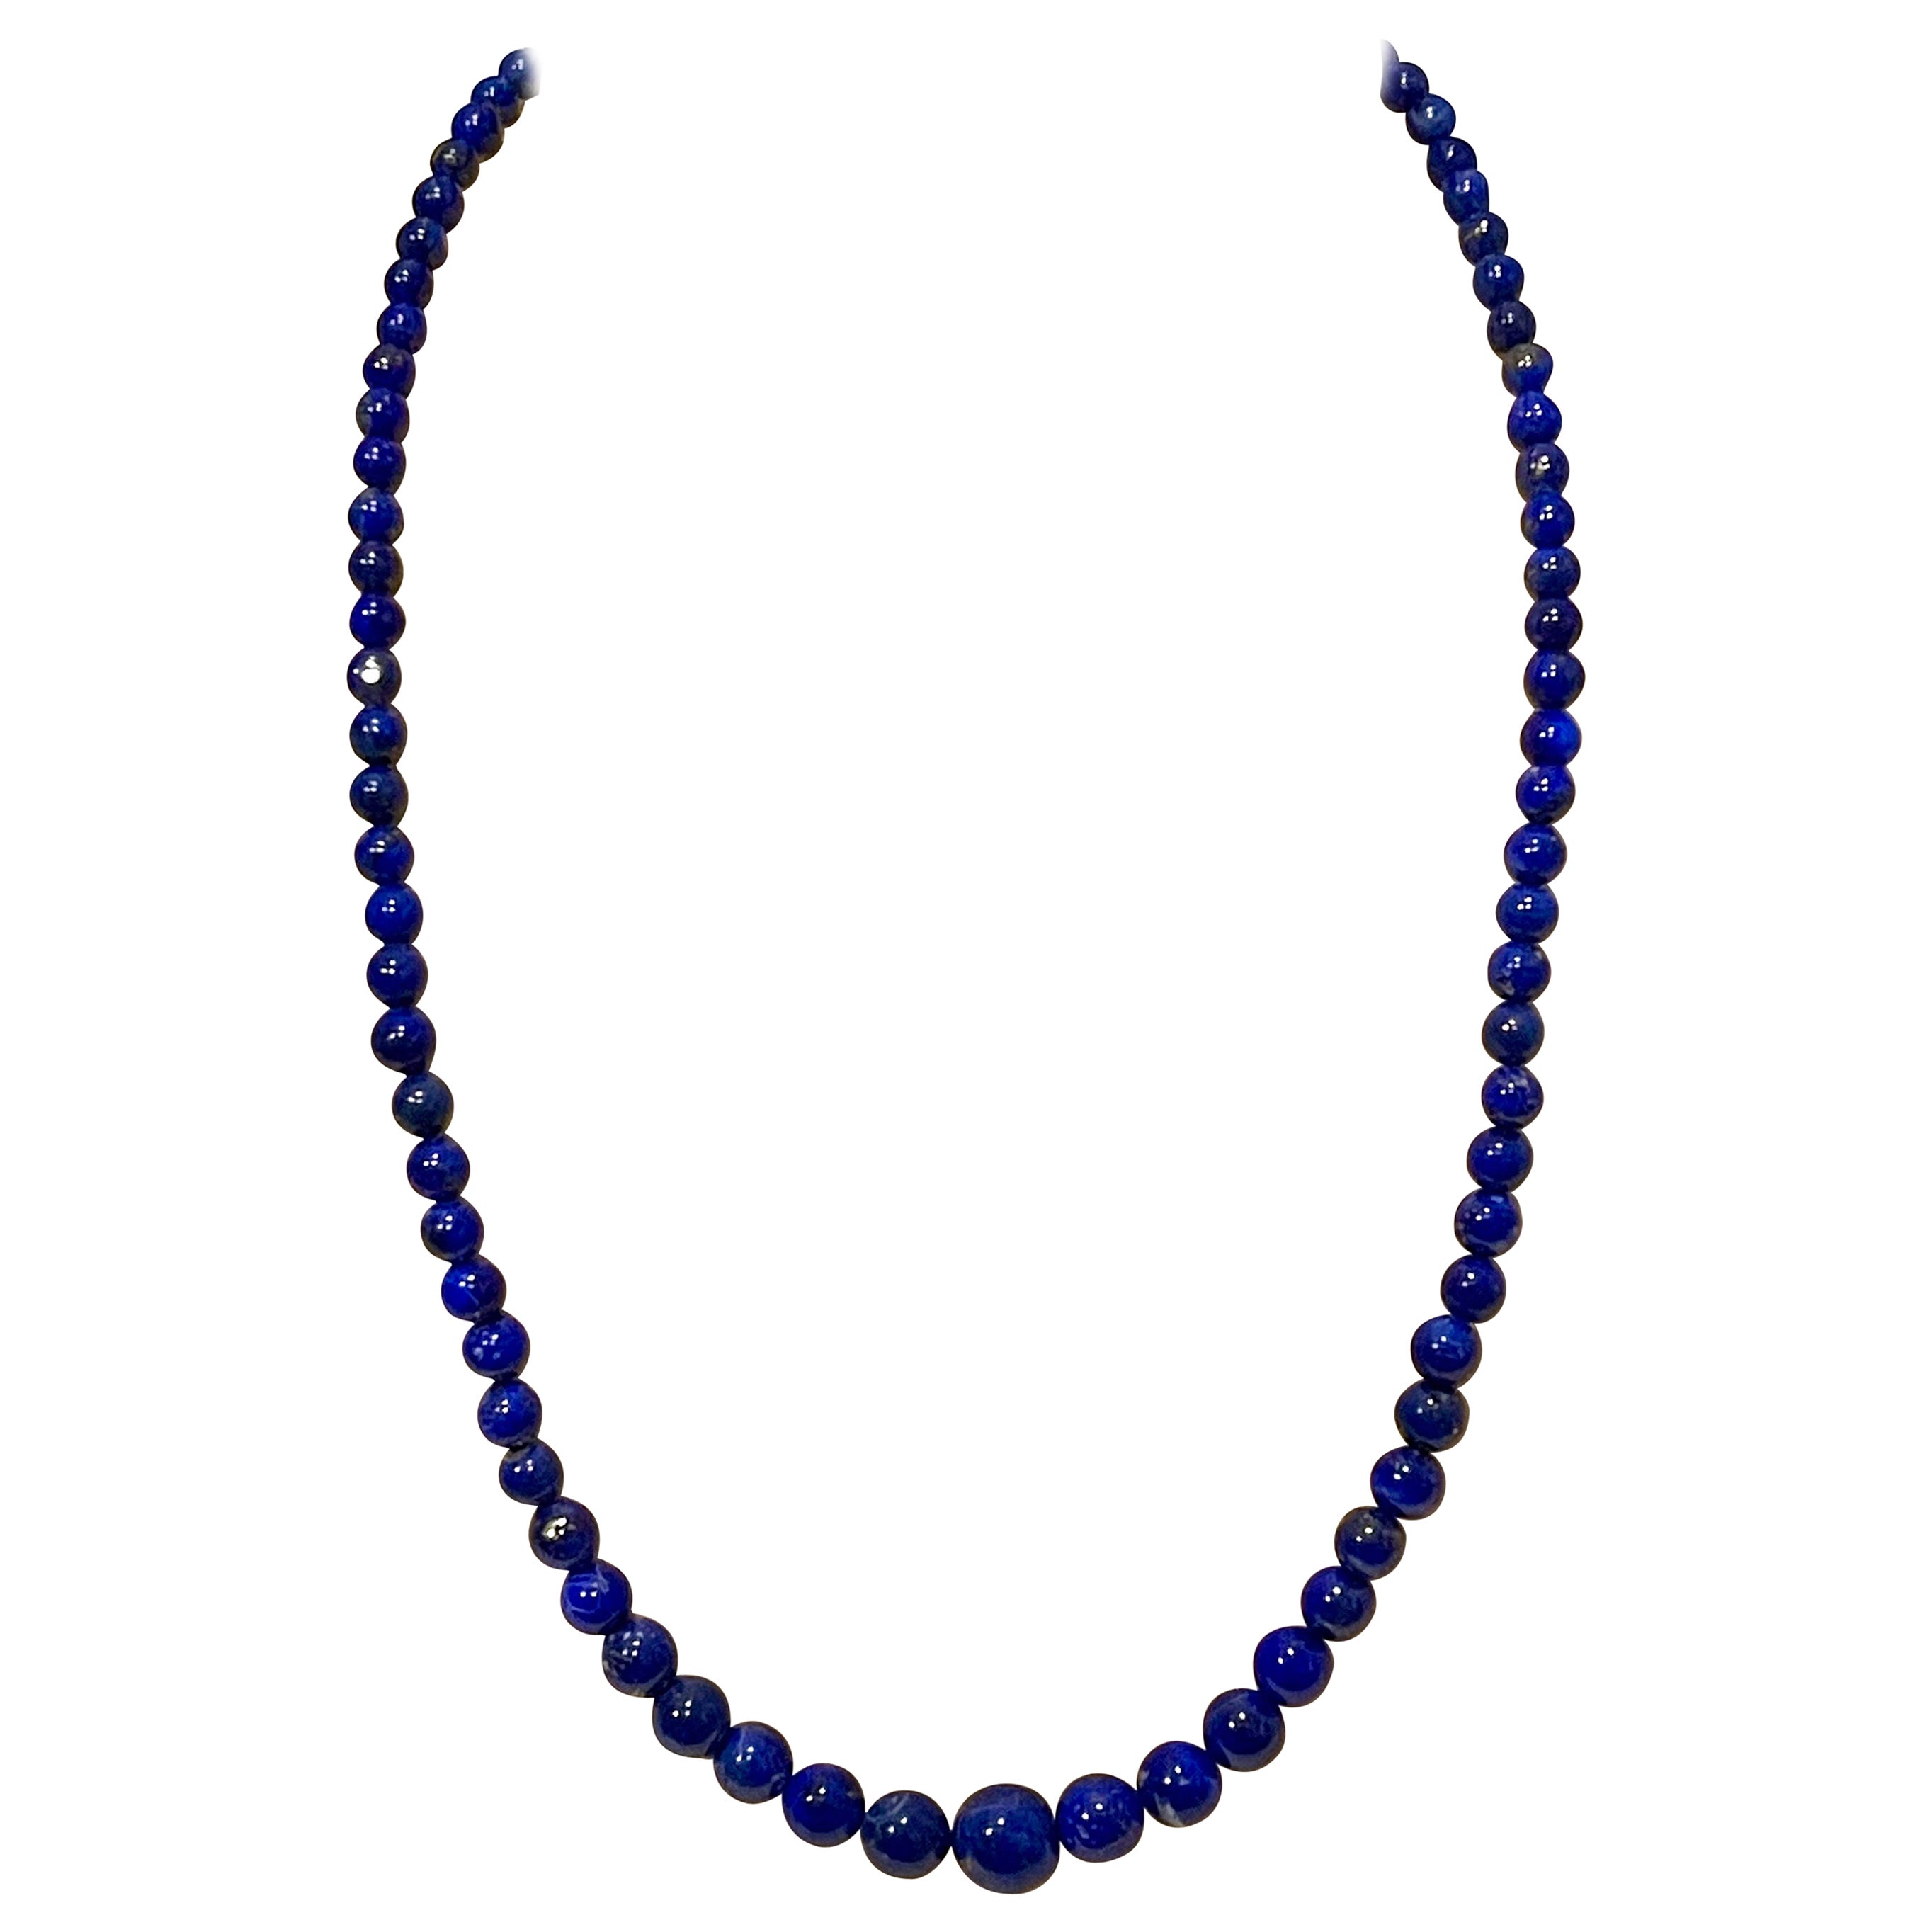 Vintage Lapis Lazuli Single Strand Necklace with 14 Karat Yellow Long Hook Clasp For Sale